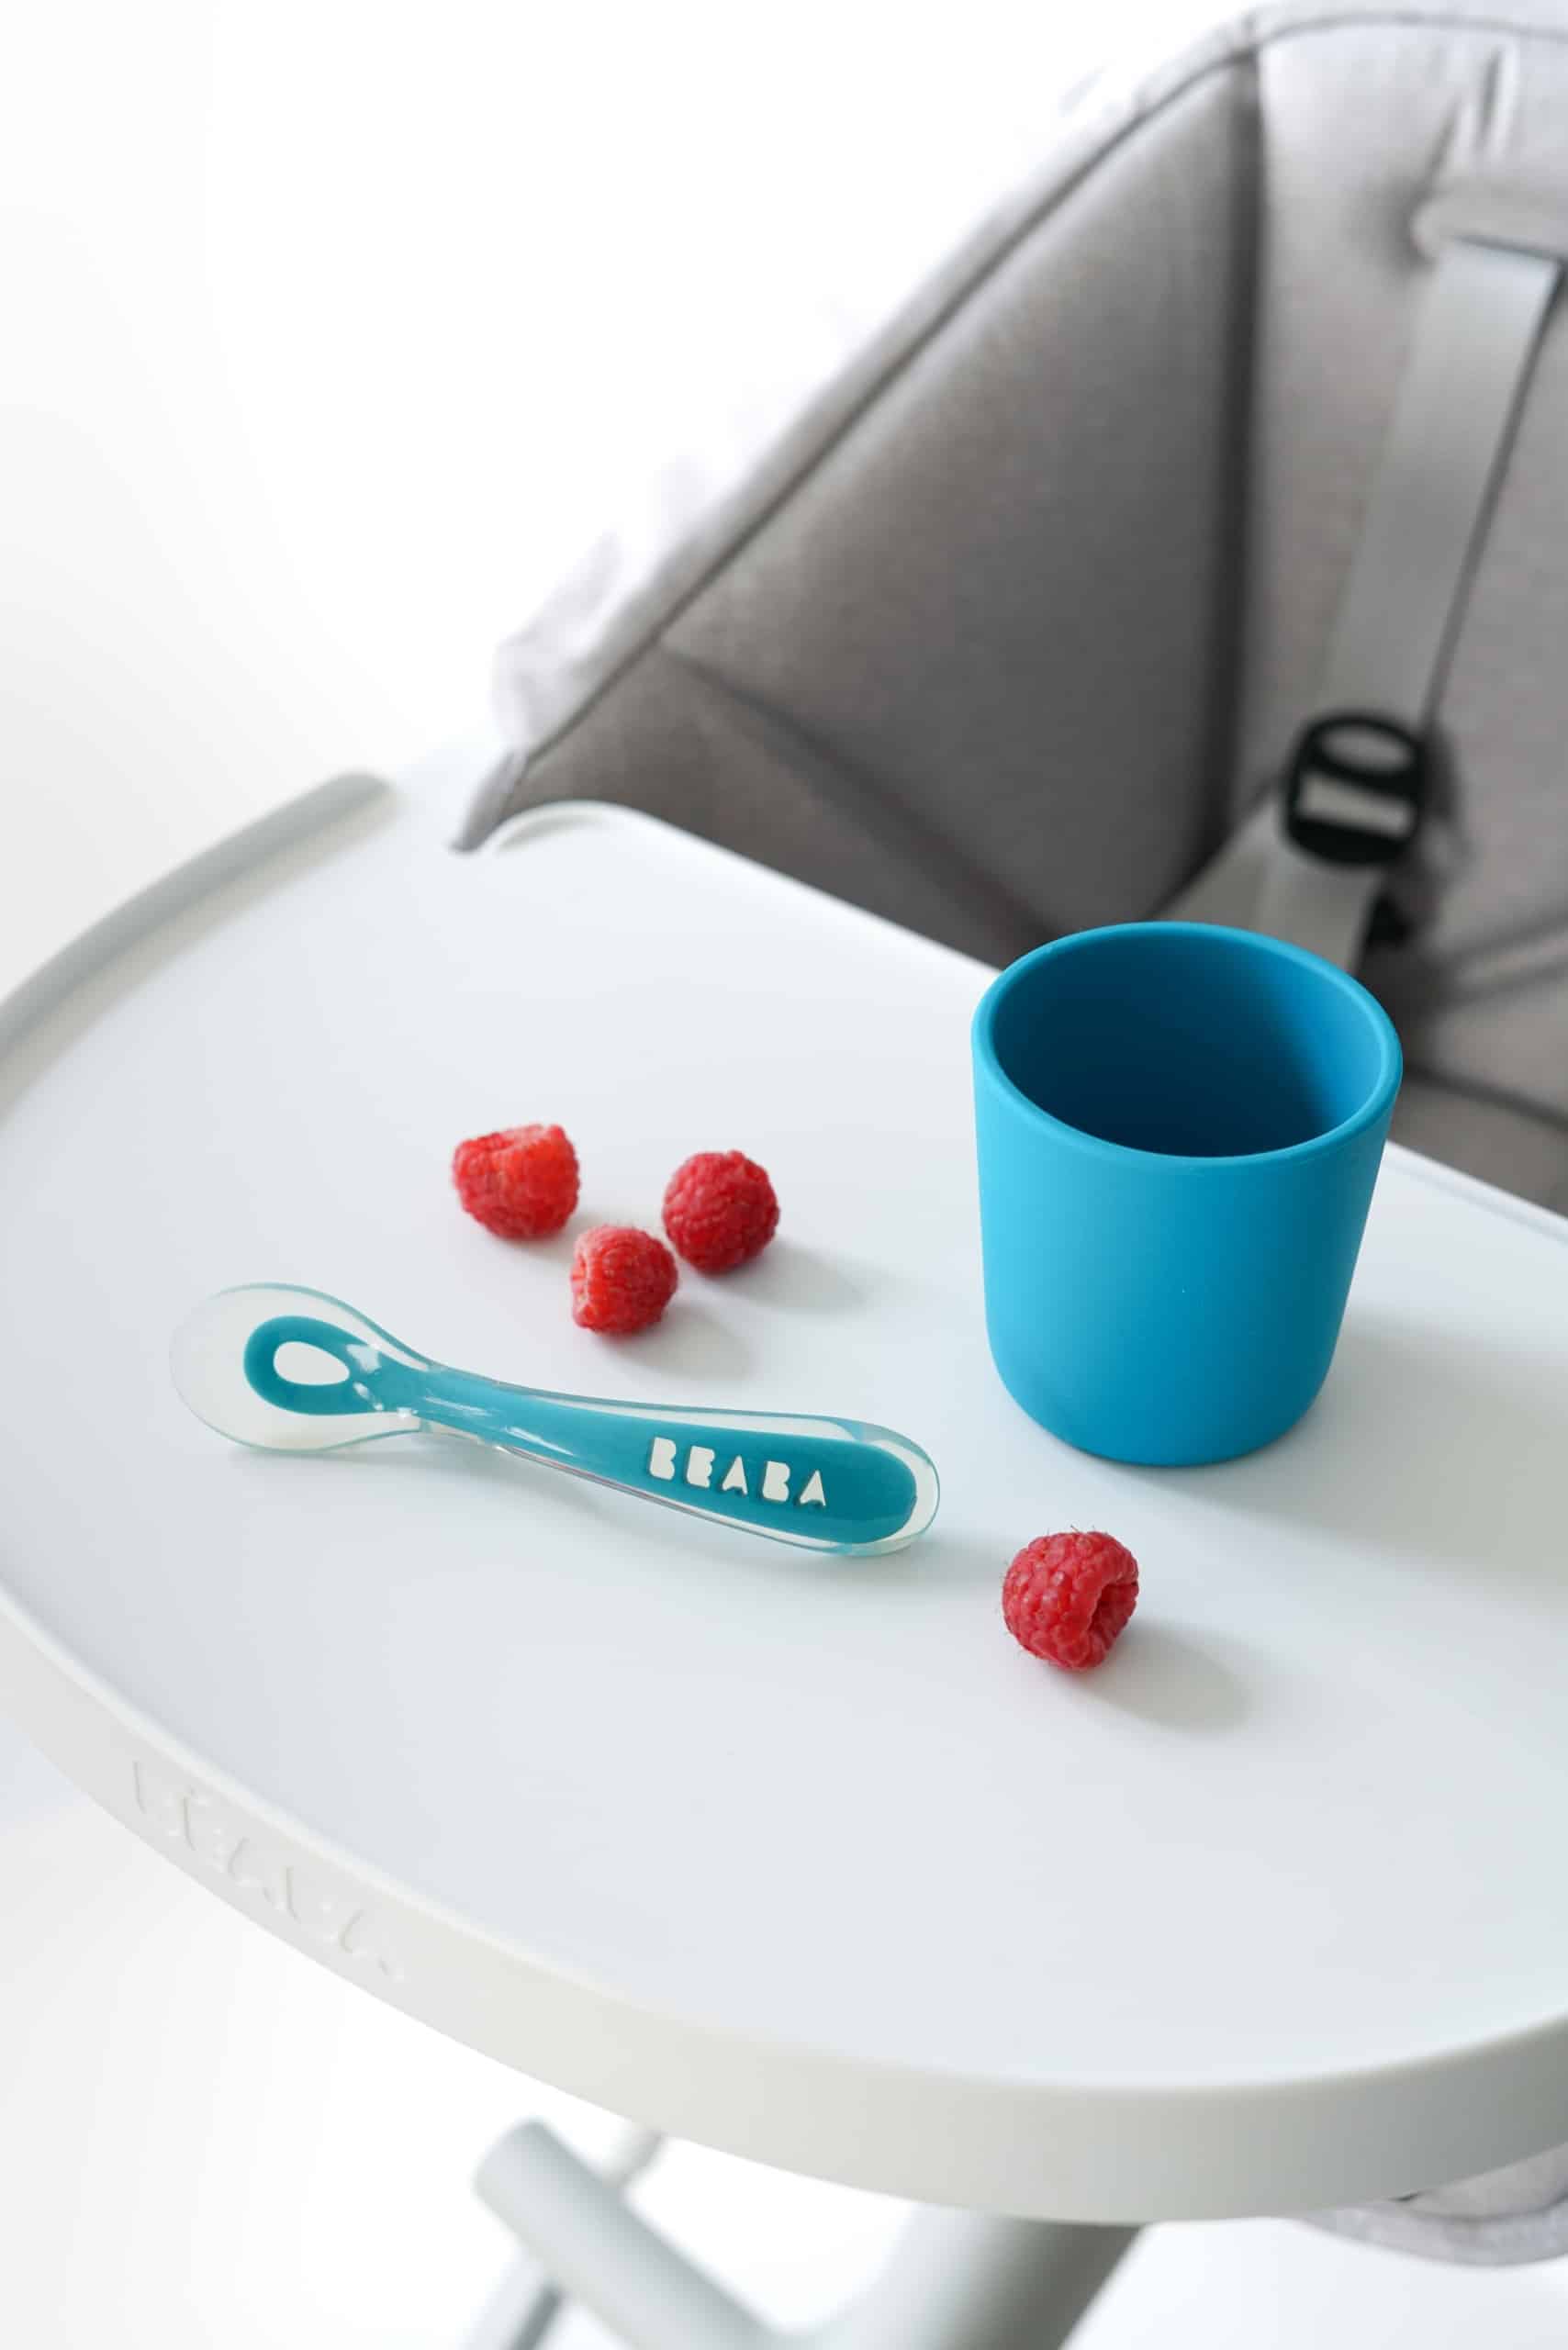 Beaba Non-slip silicone cup with spoon